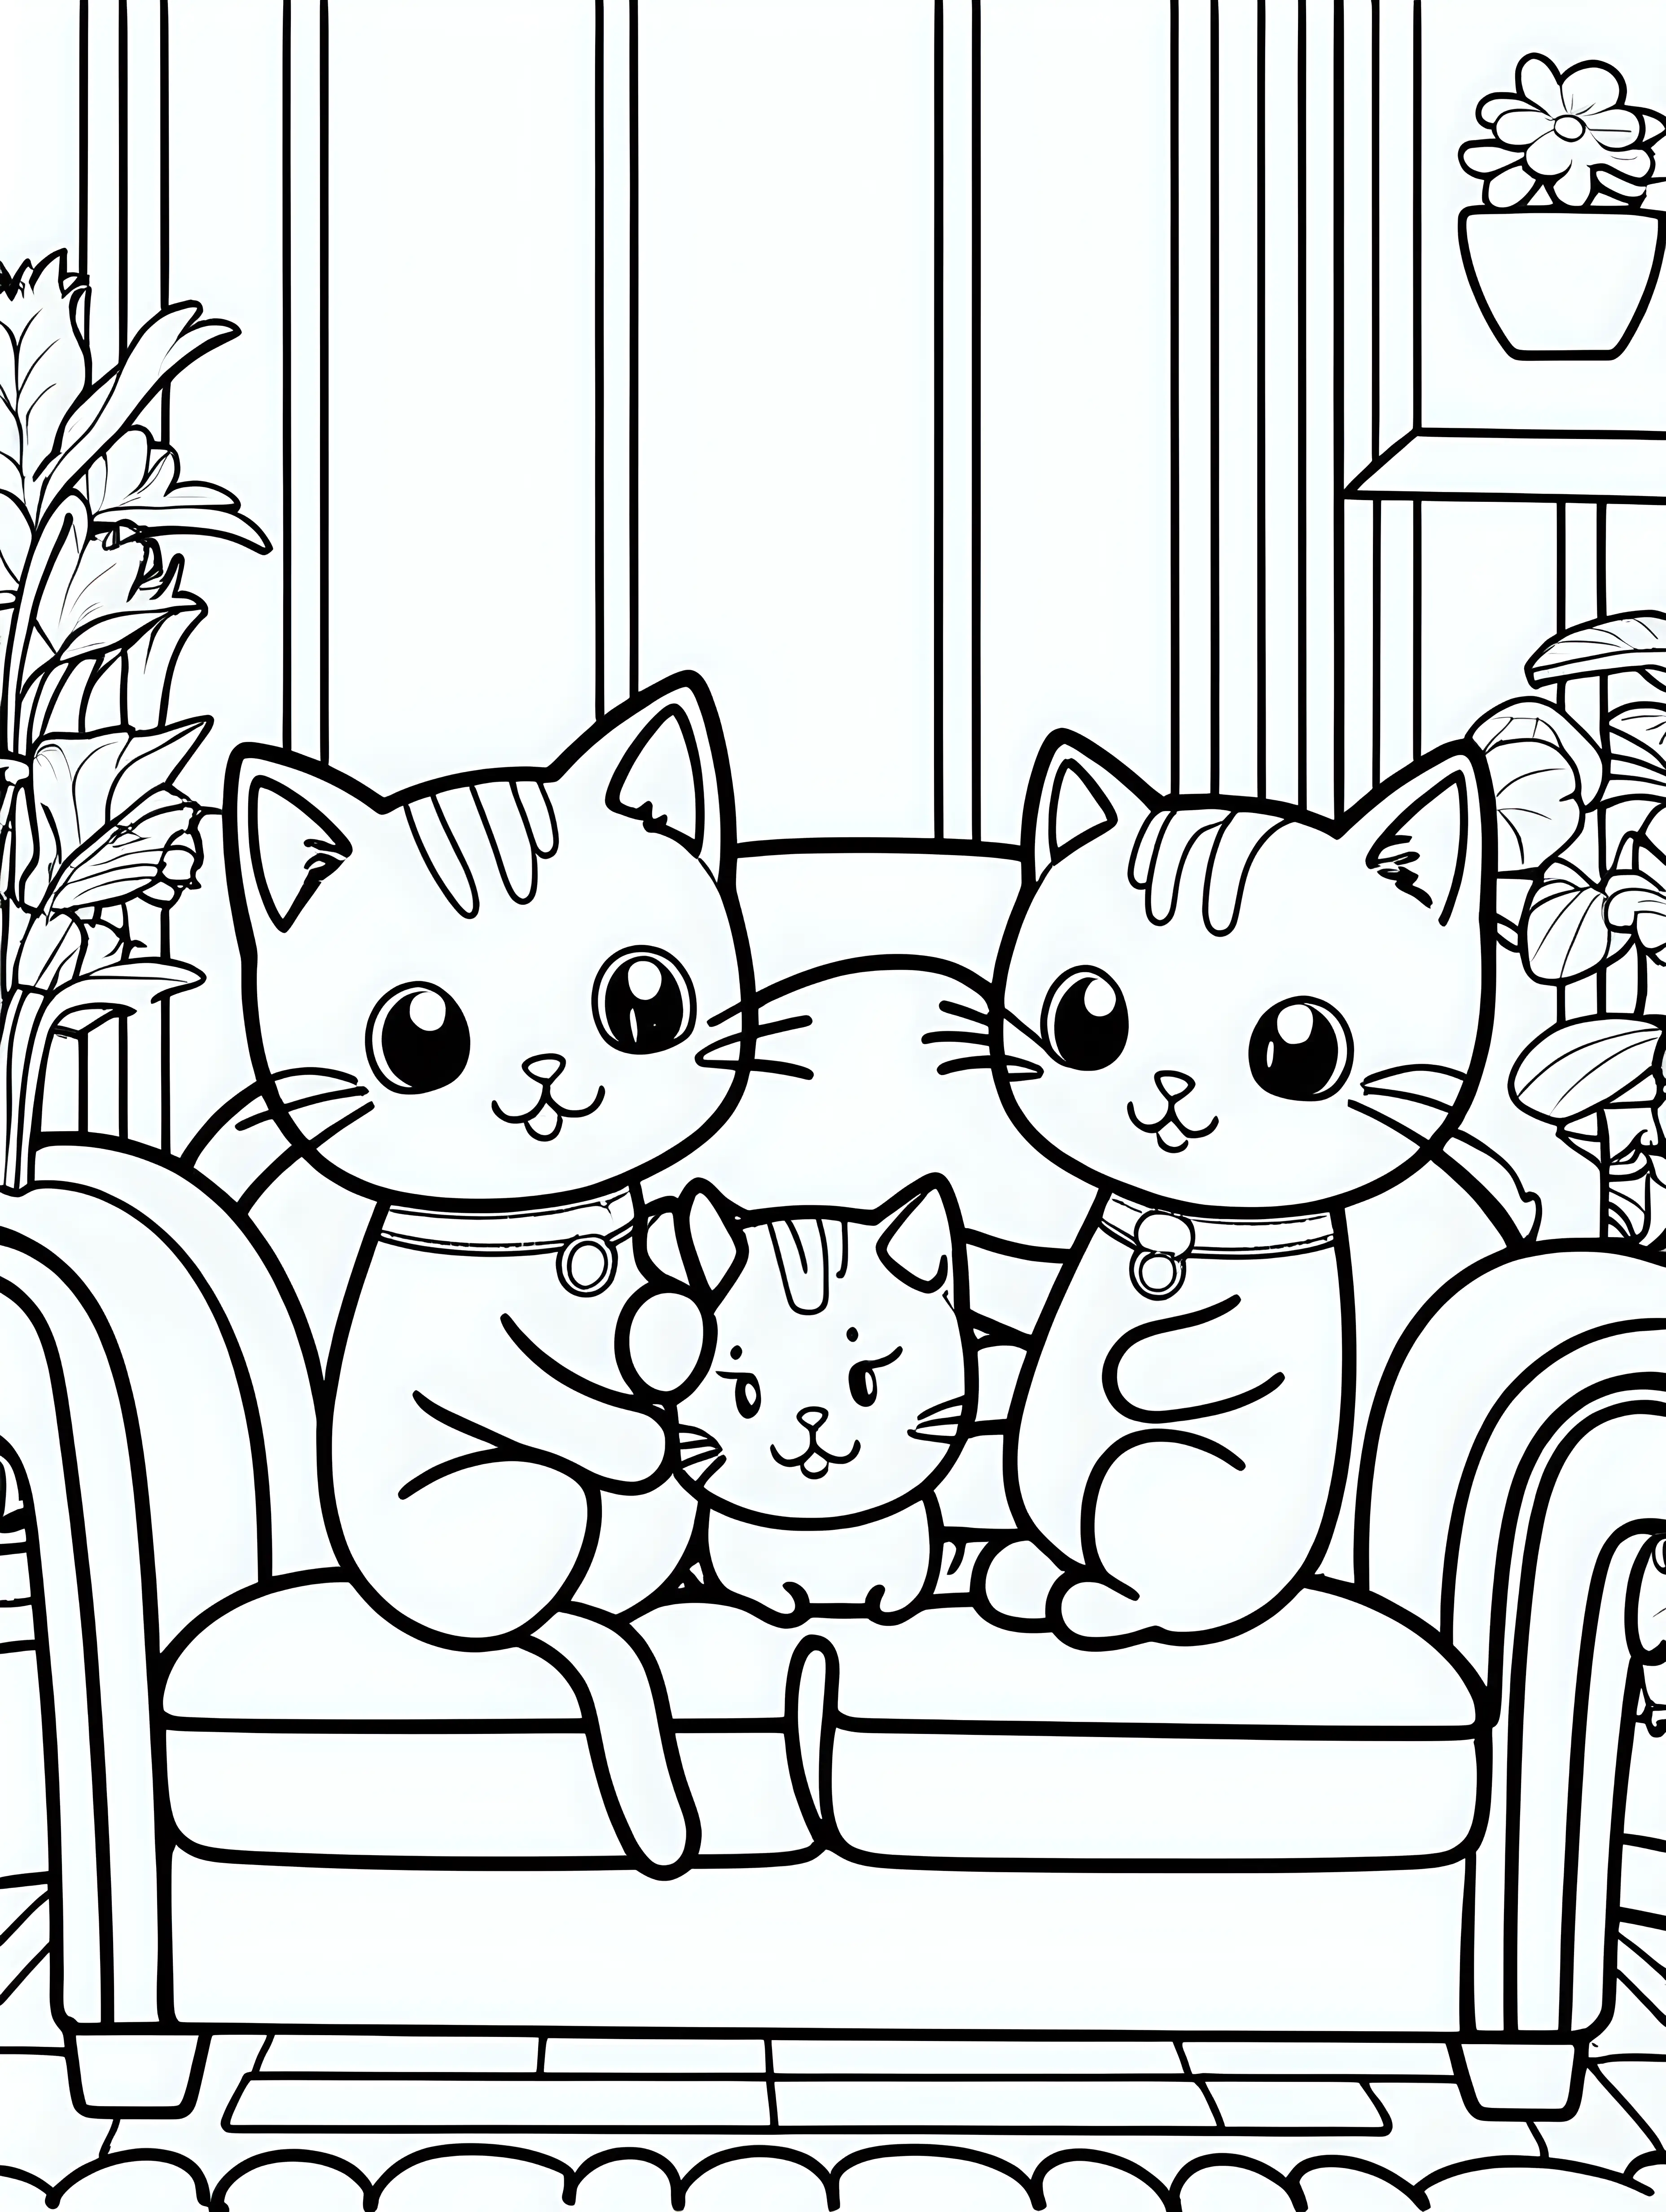 Adorable Kawaii Cats Playing on Couch Coloring Page